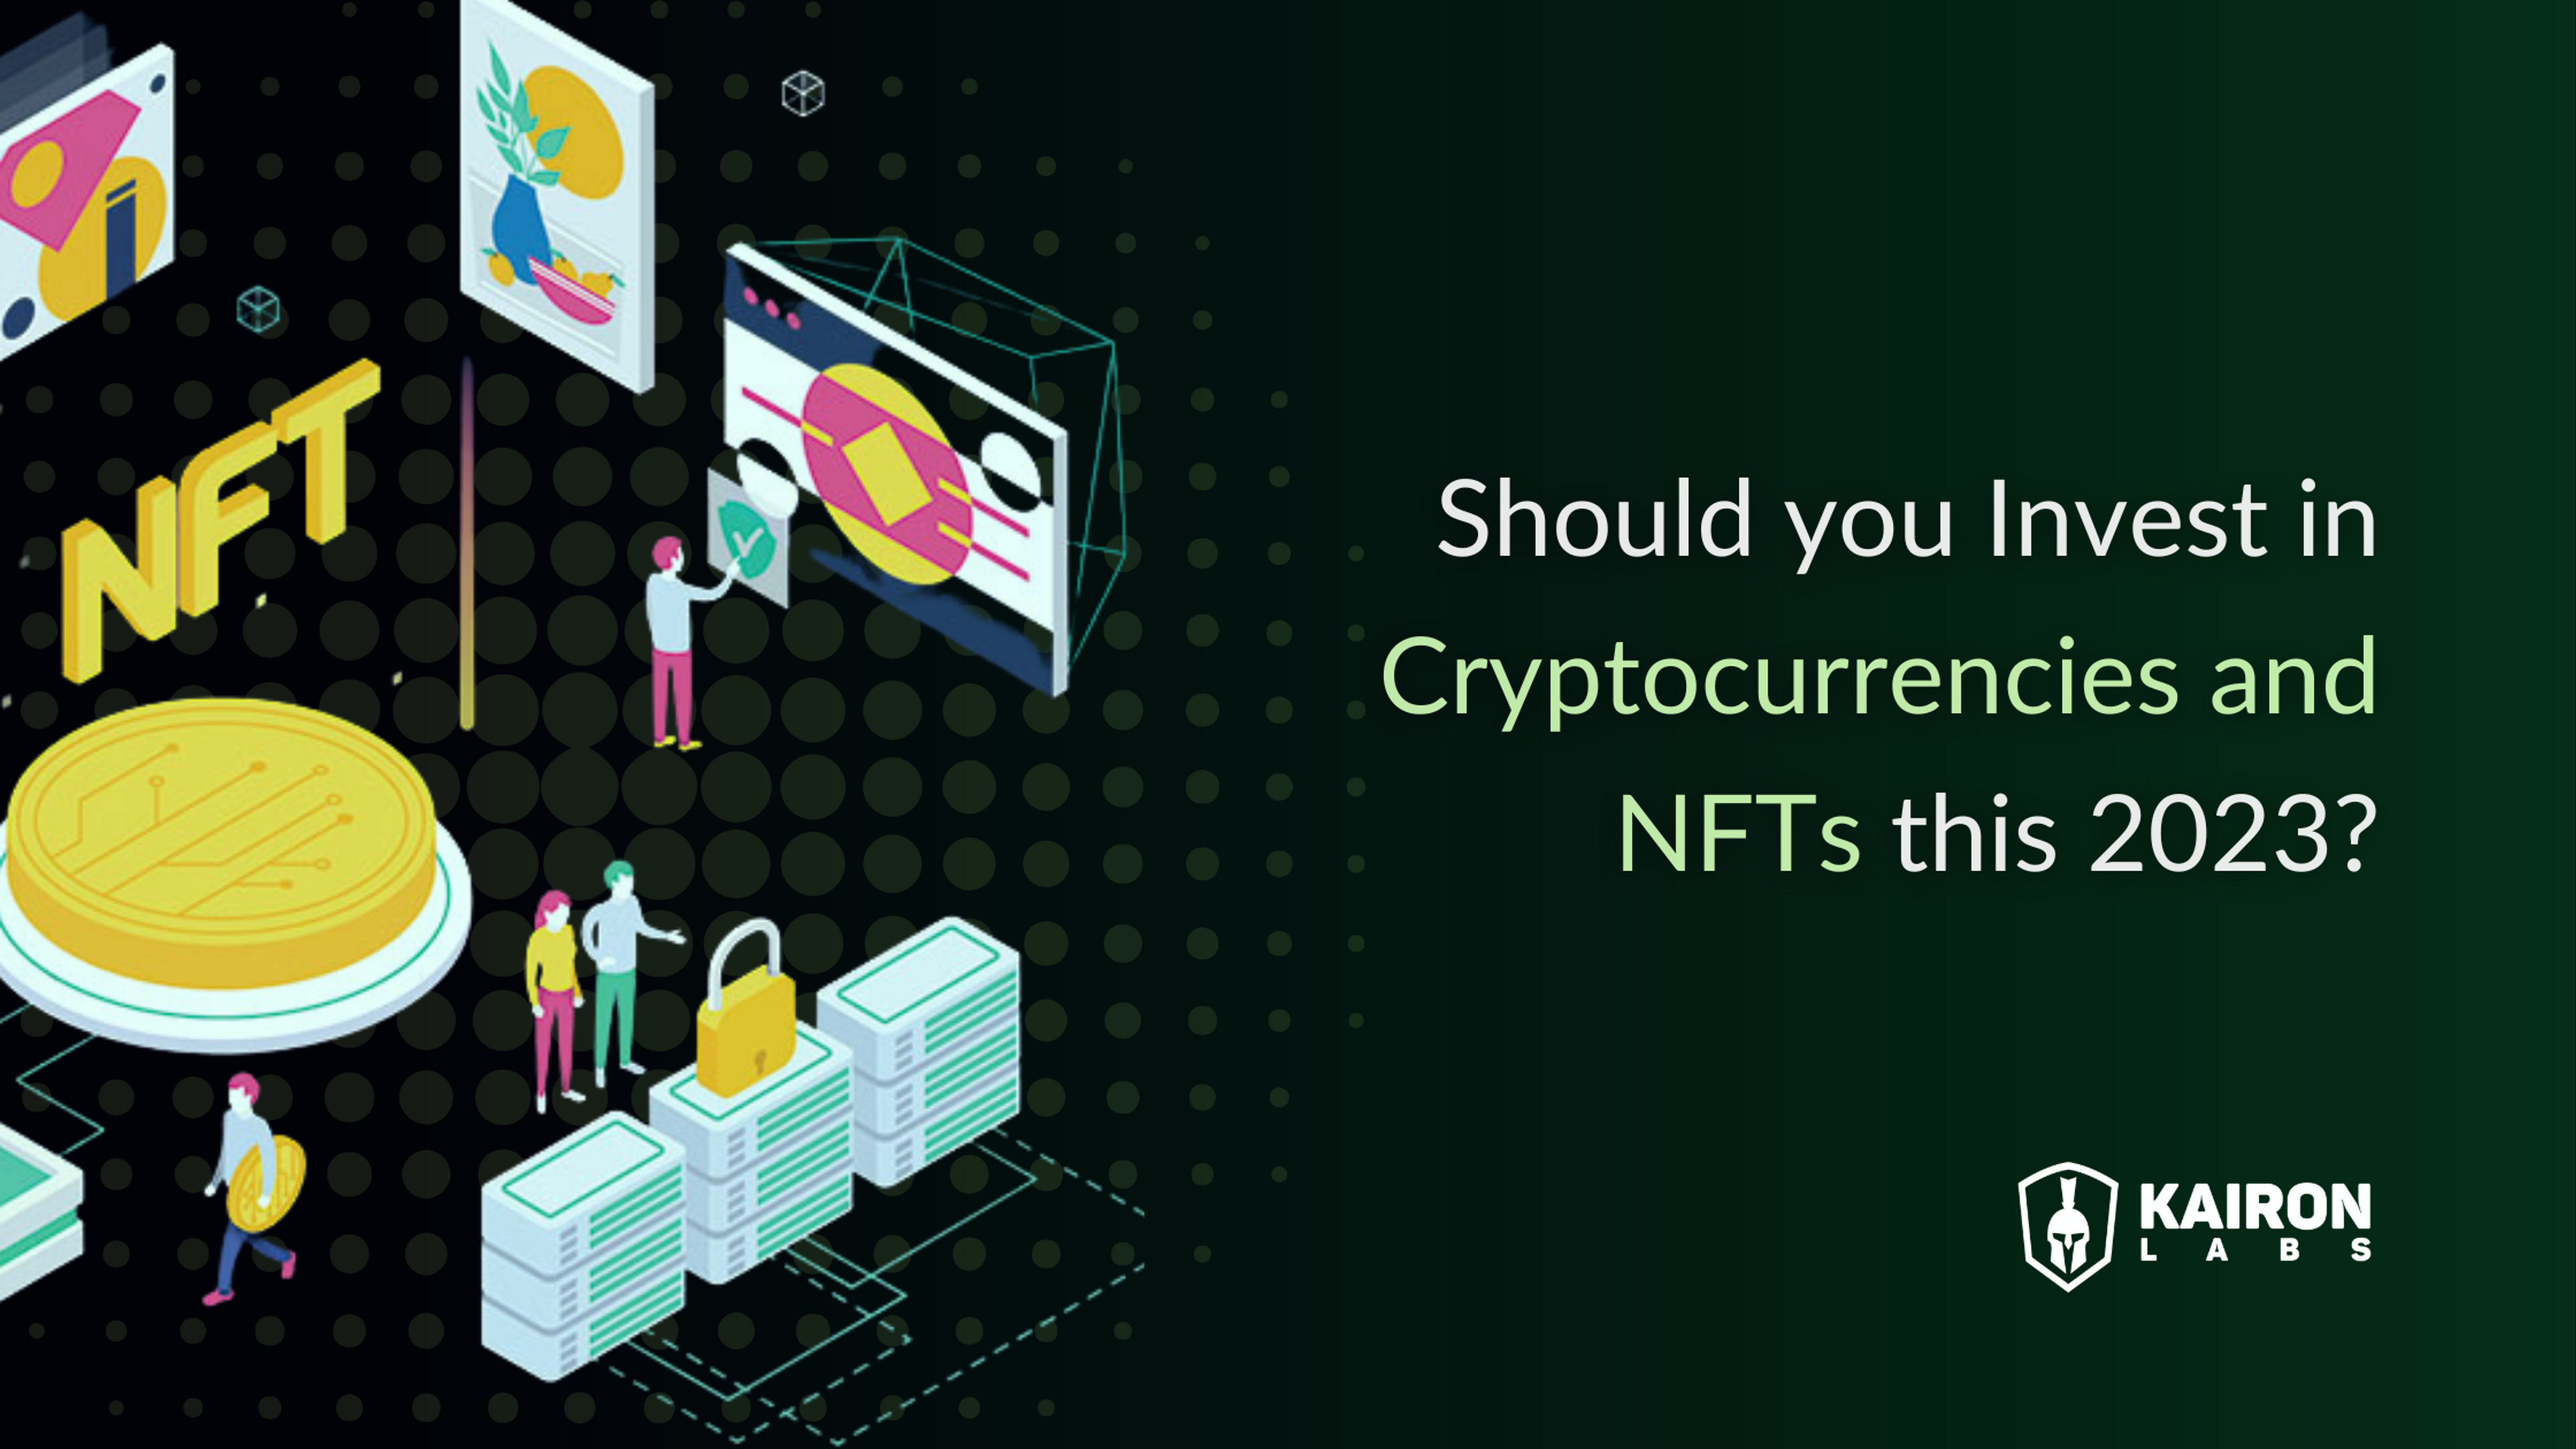 Should you invest in cryptocurrencies and NFTs this 2023? | Kairon Labs - Crypto Market Maker and Advisory